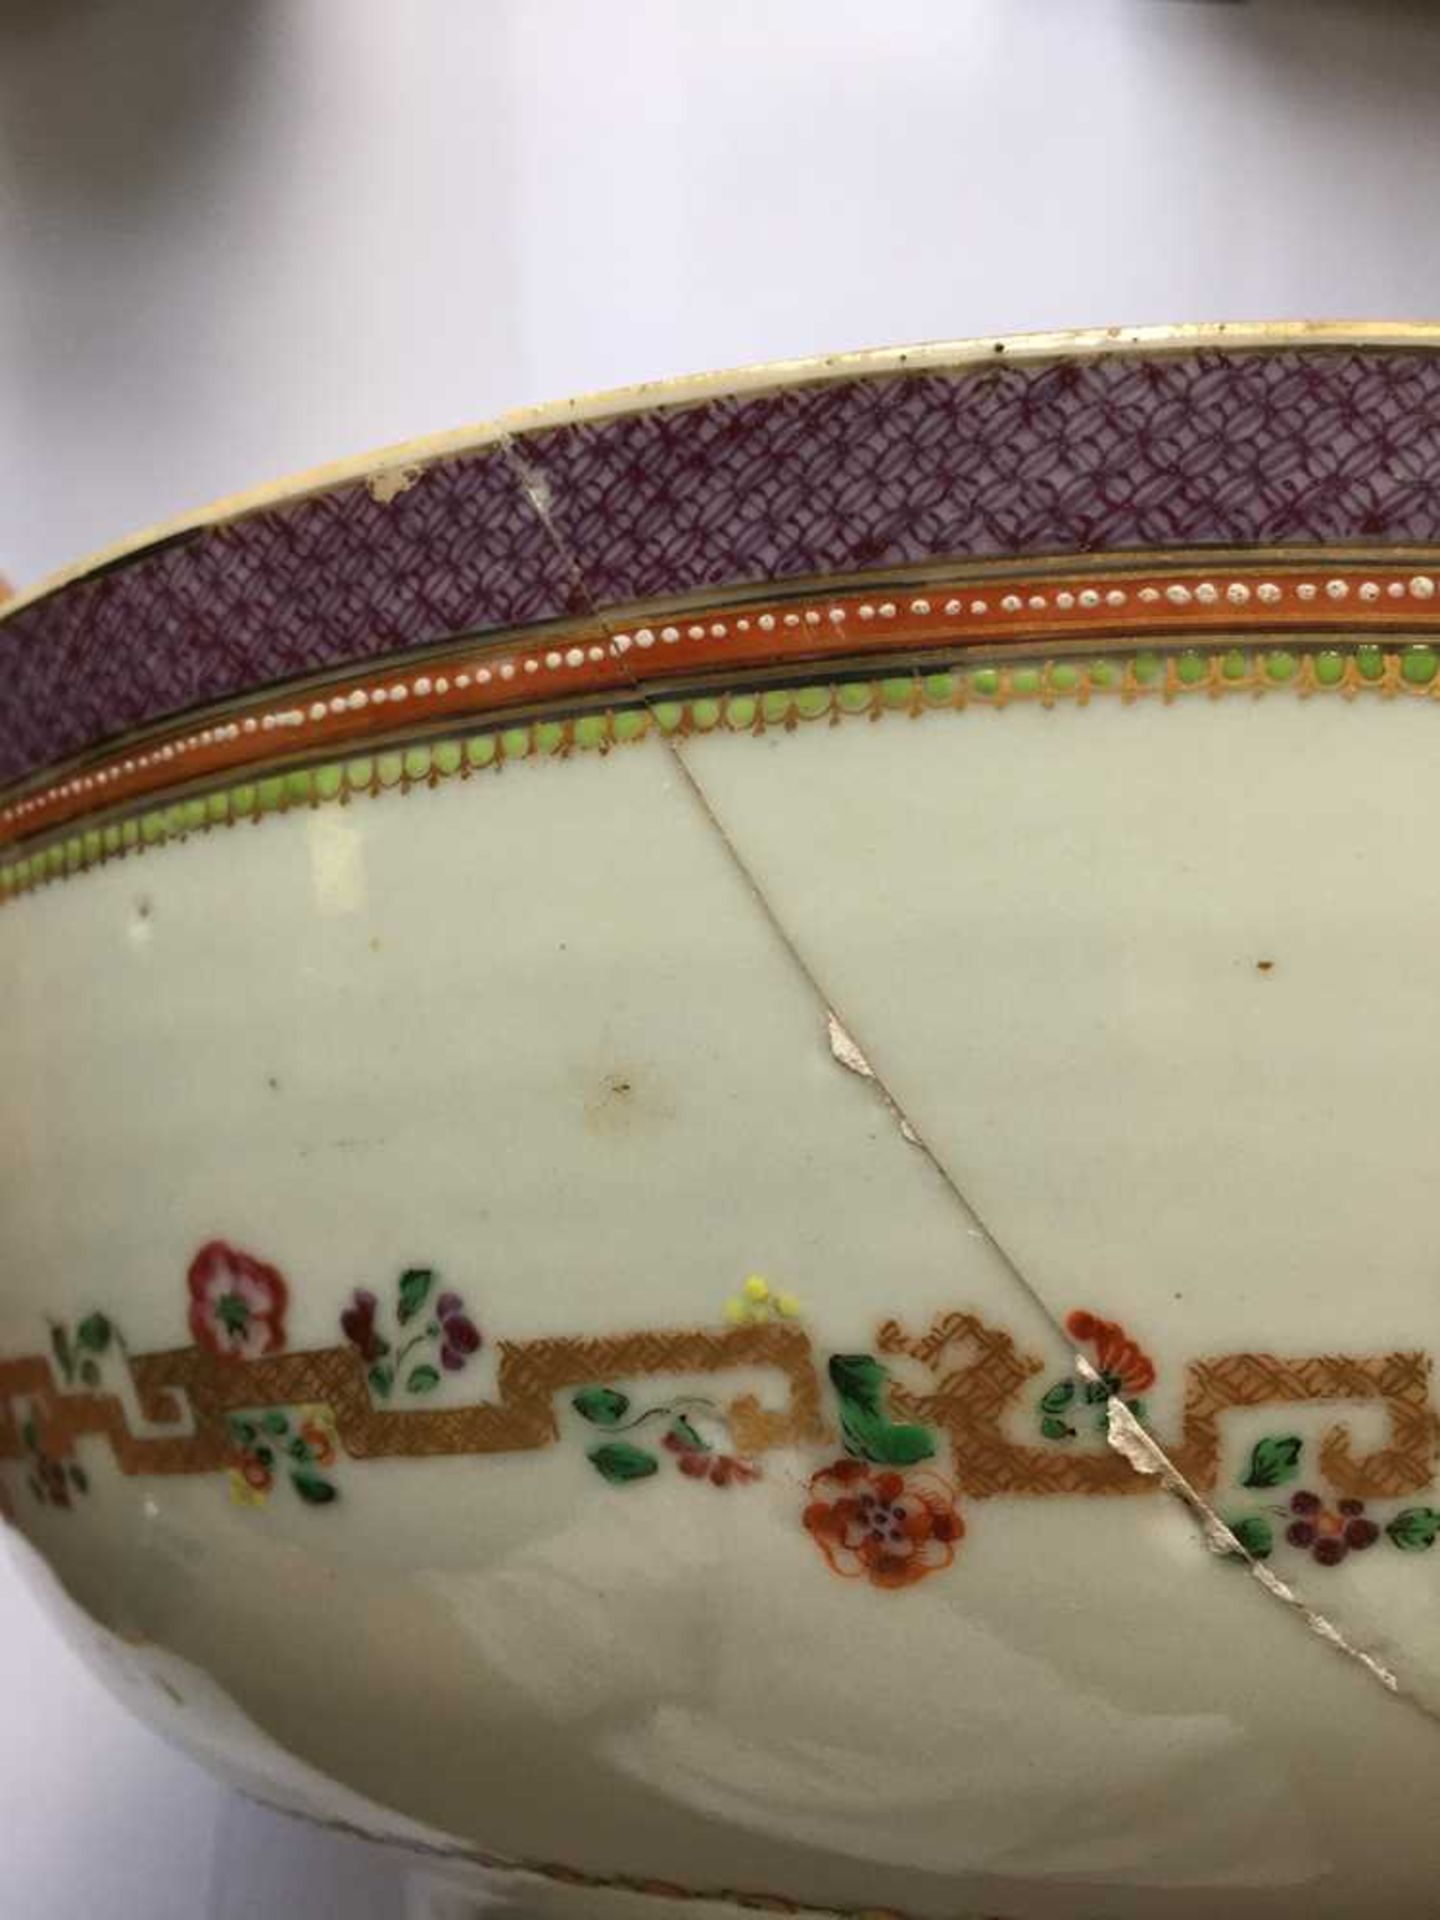 TWO CHINESE EXPORT PORCELAIN PUNCH BOWLS QING DYNASTY, LATE 18TH/19TH CENTURY - Image 11 of 33